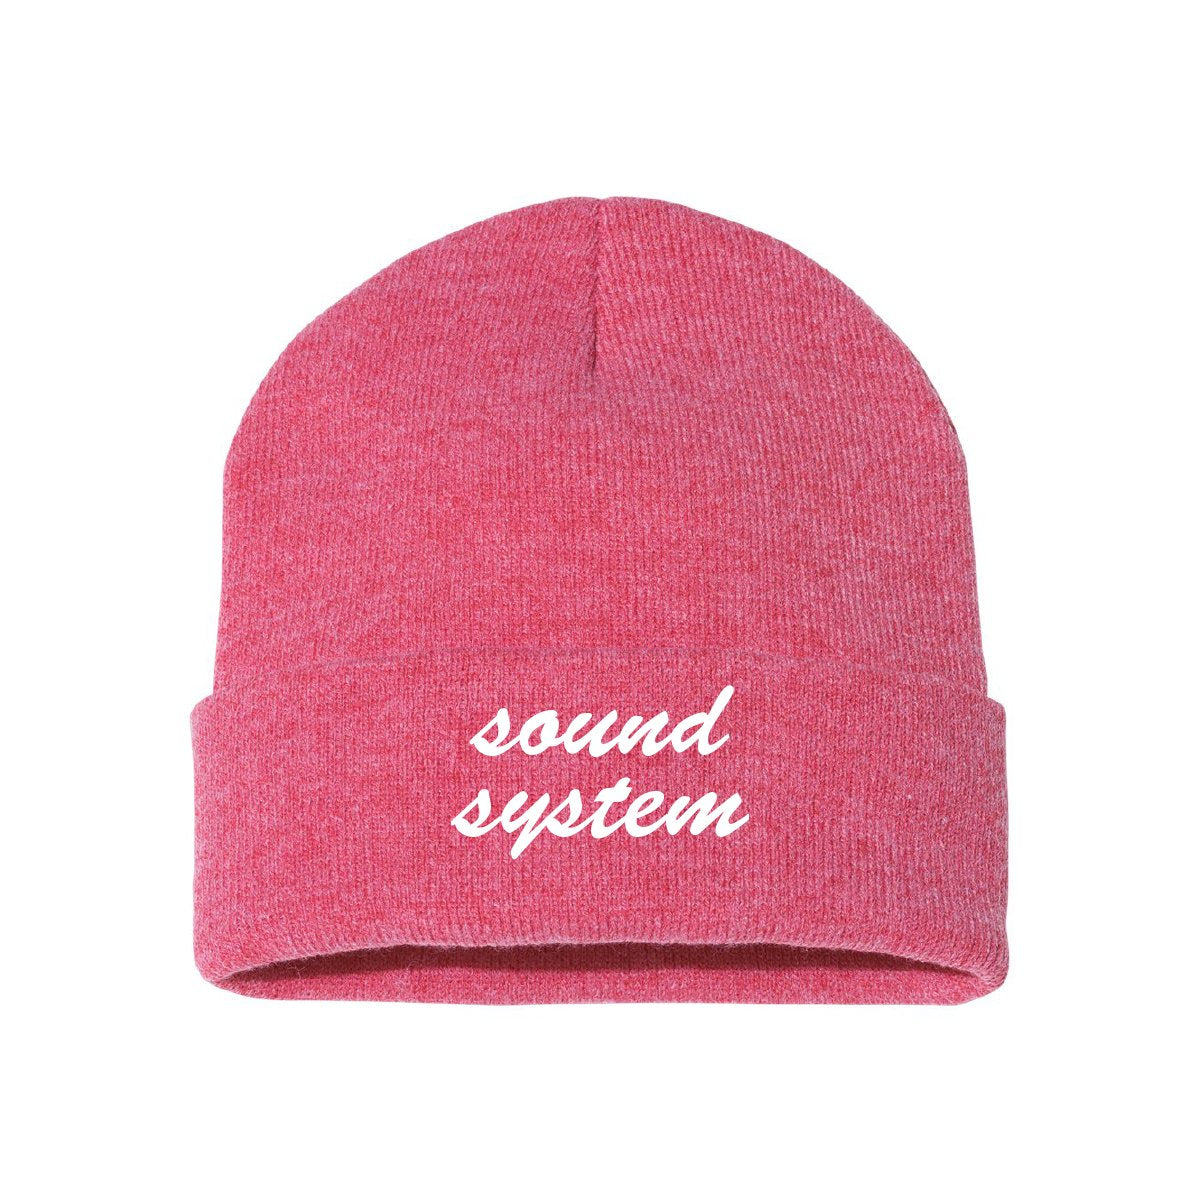 Sound System Red Classic Knit Beanie